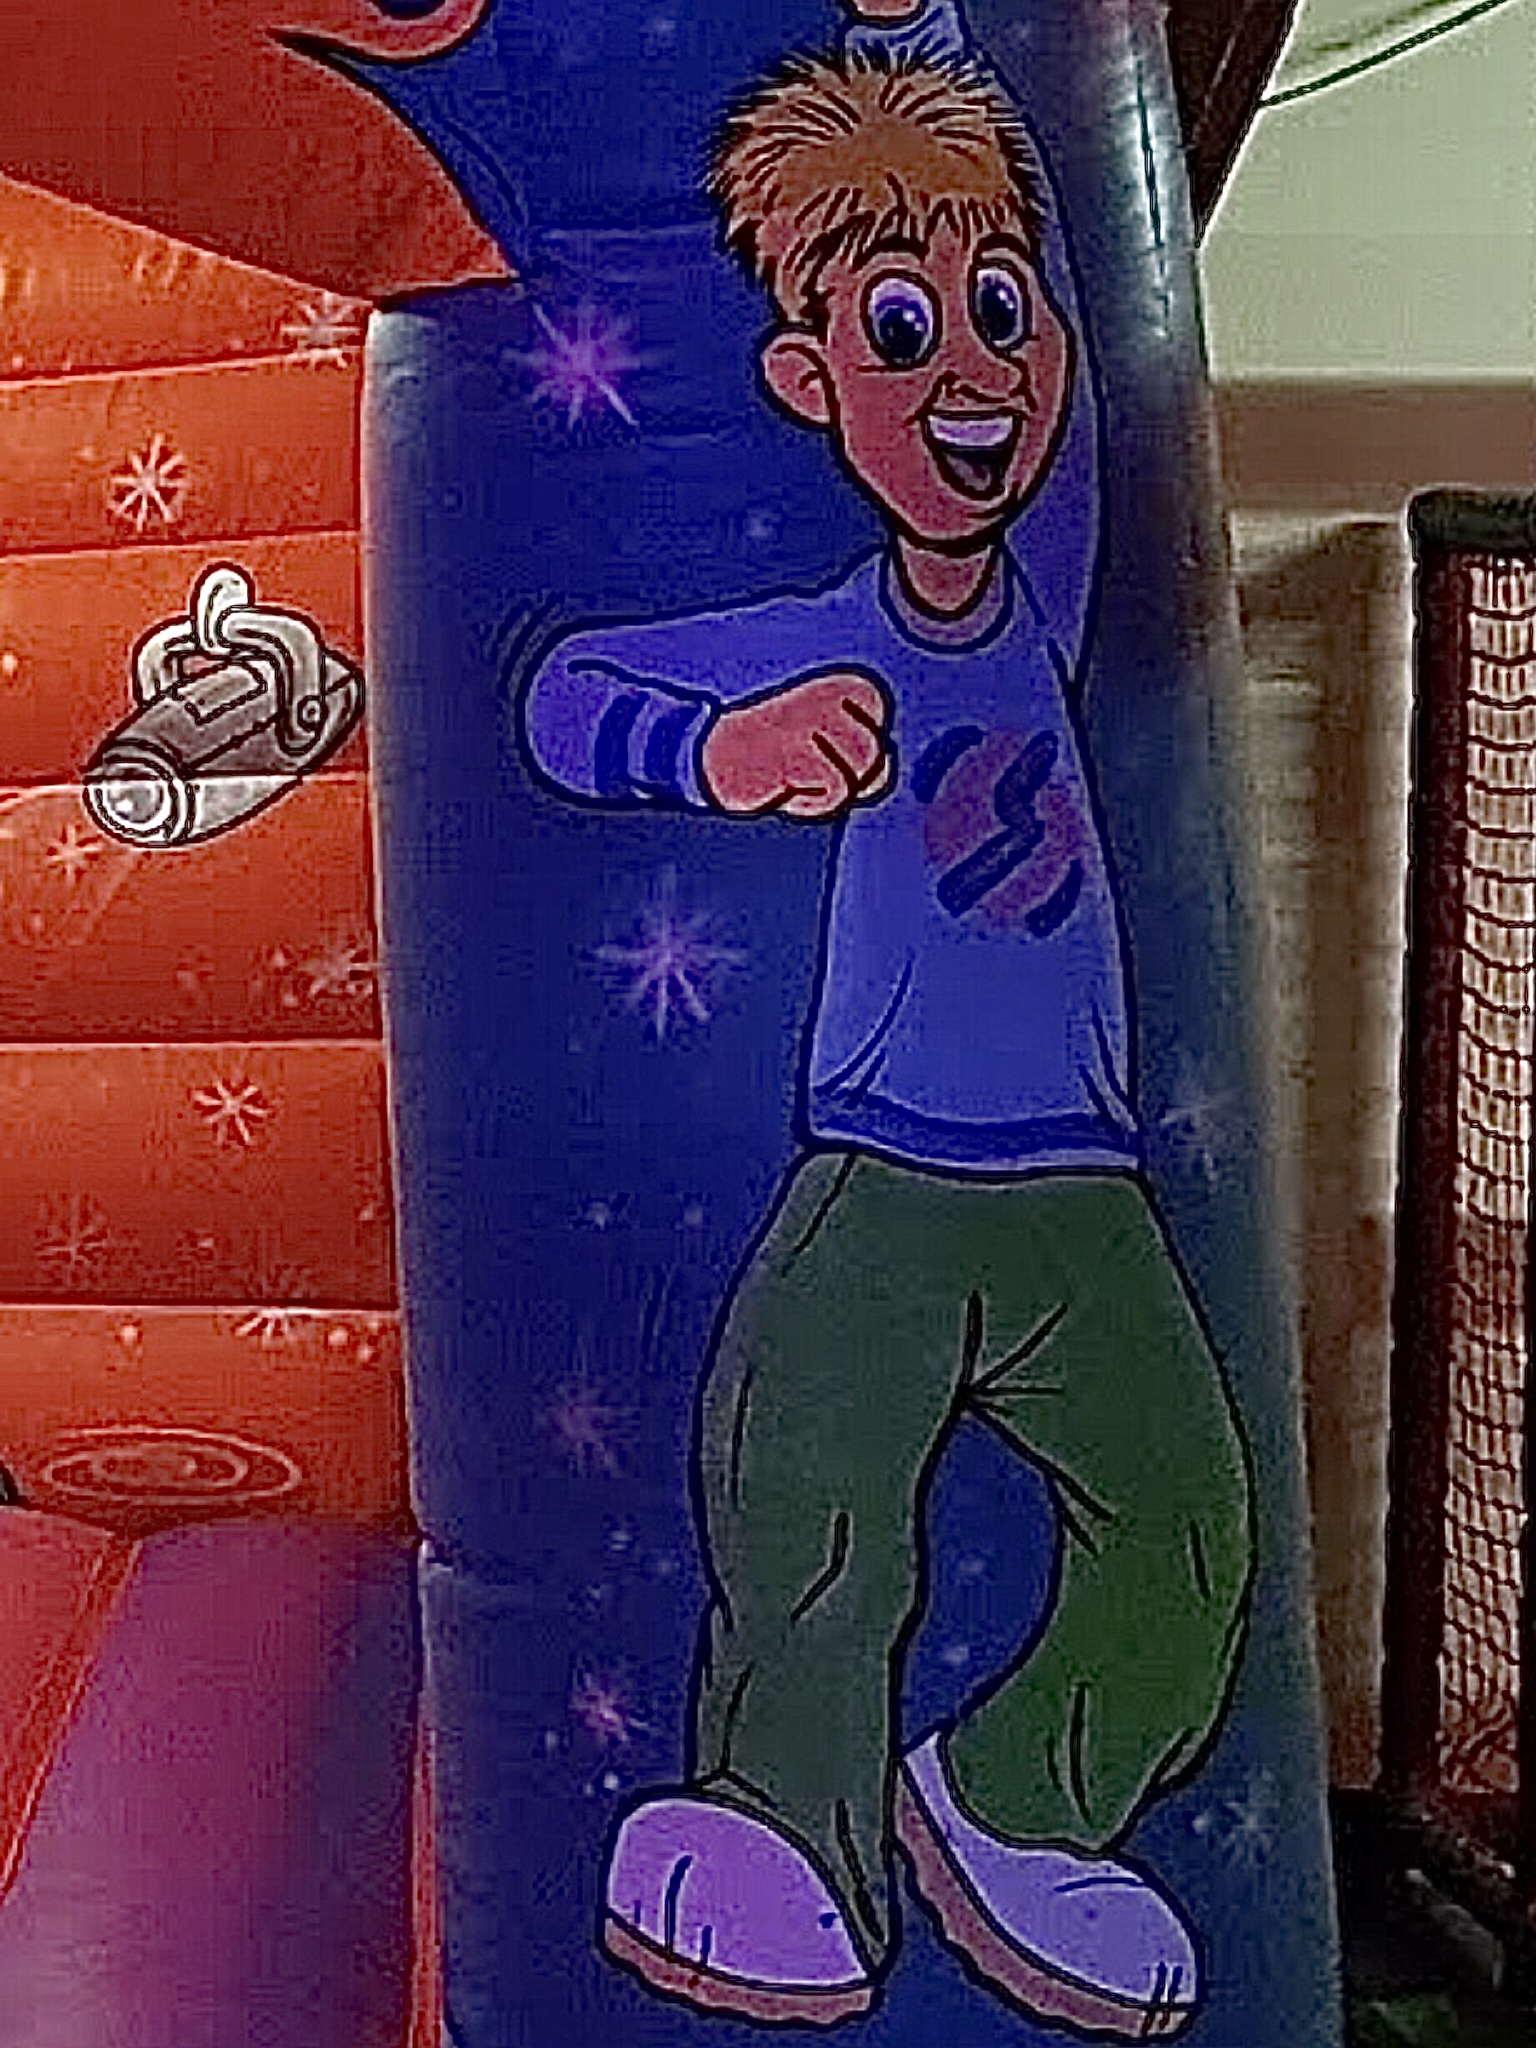 a large inflatable toy